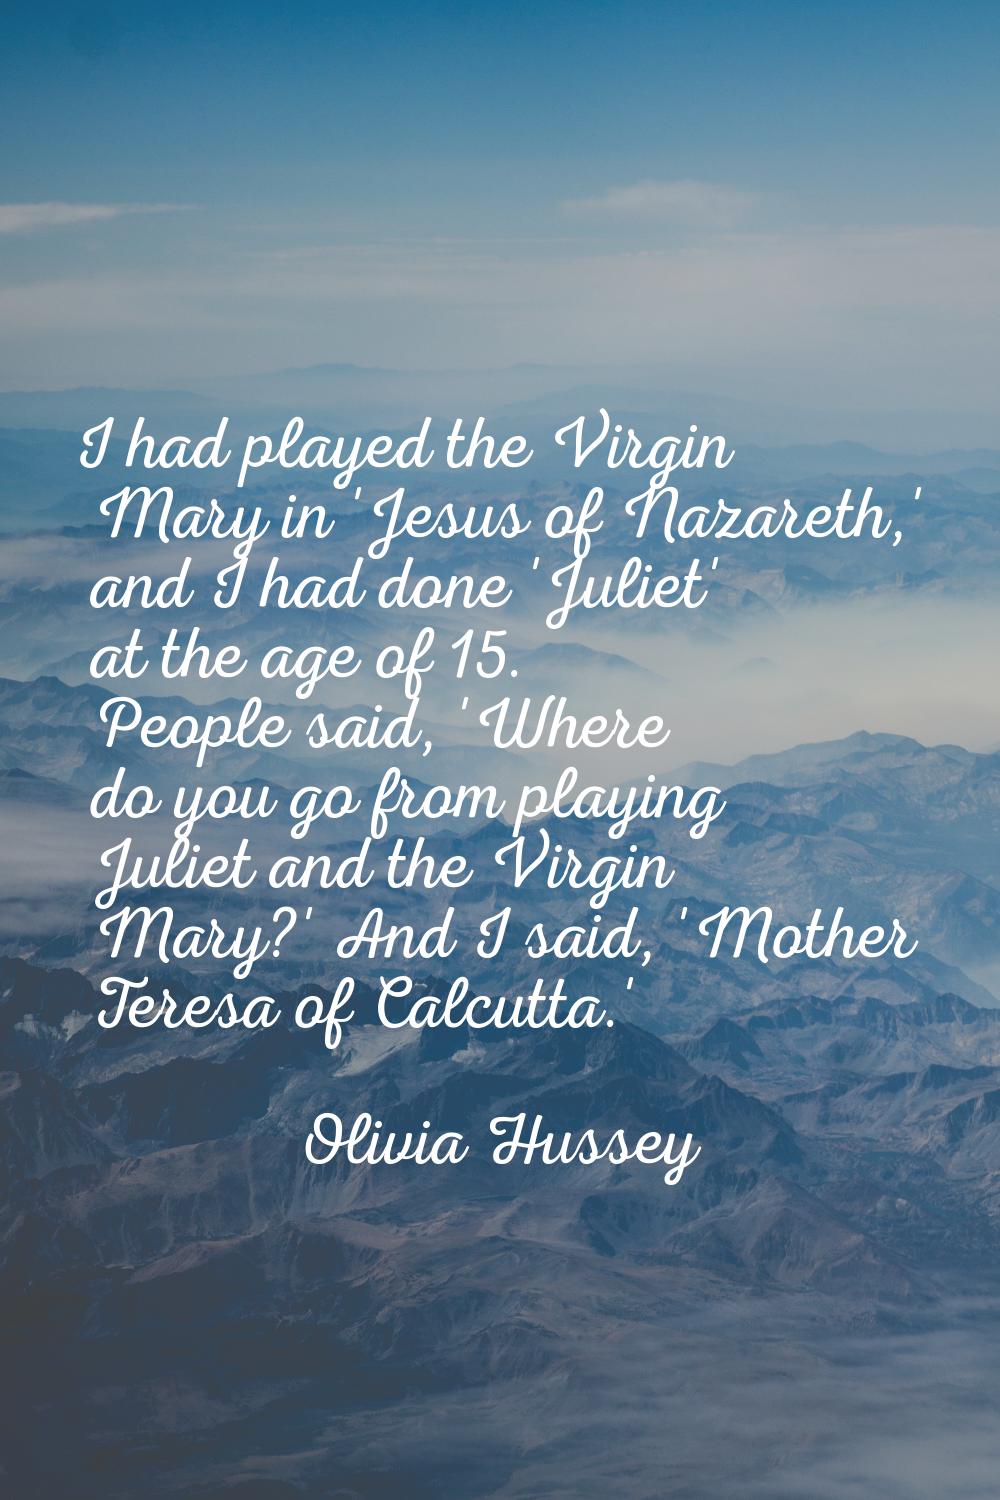 I had played the Virgin Mary in 'Jesus of Nazareth,' and I had done 'Juliet' at the age of 15. Peop